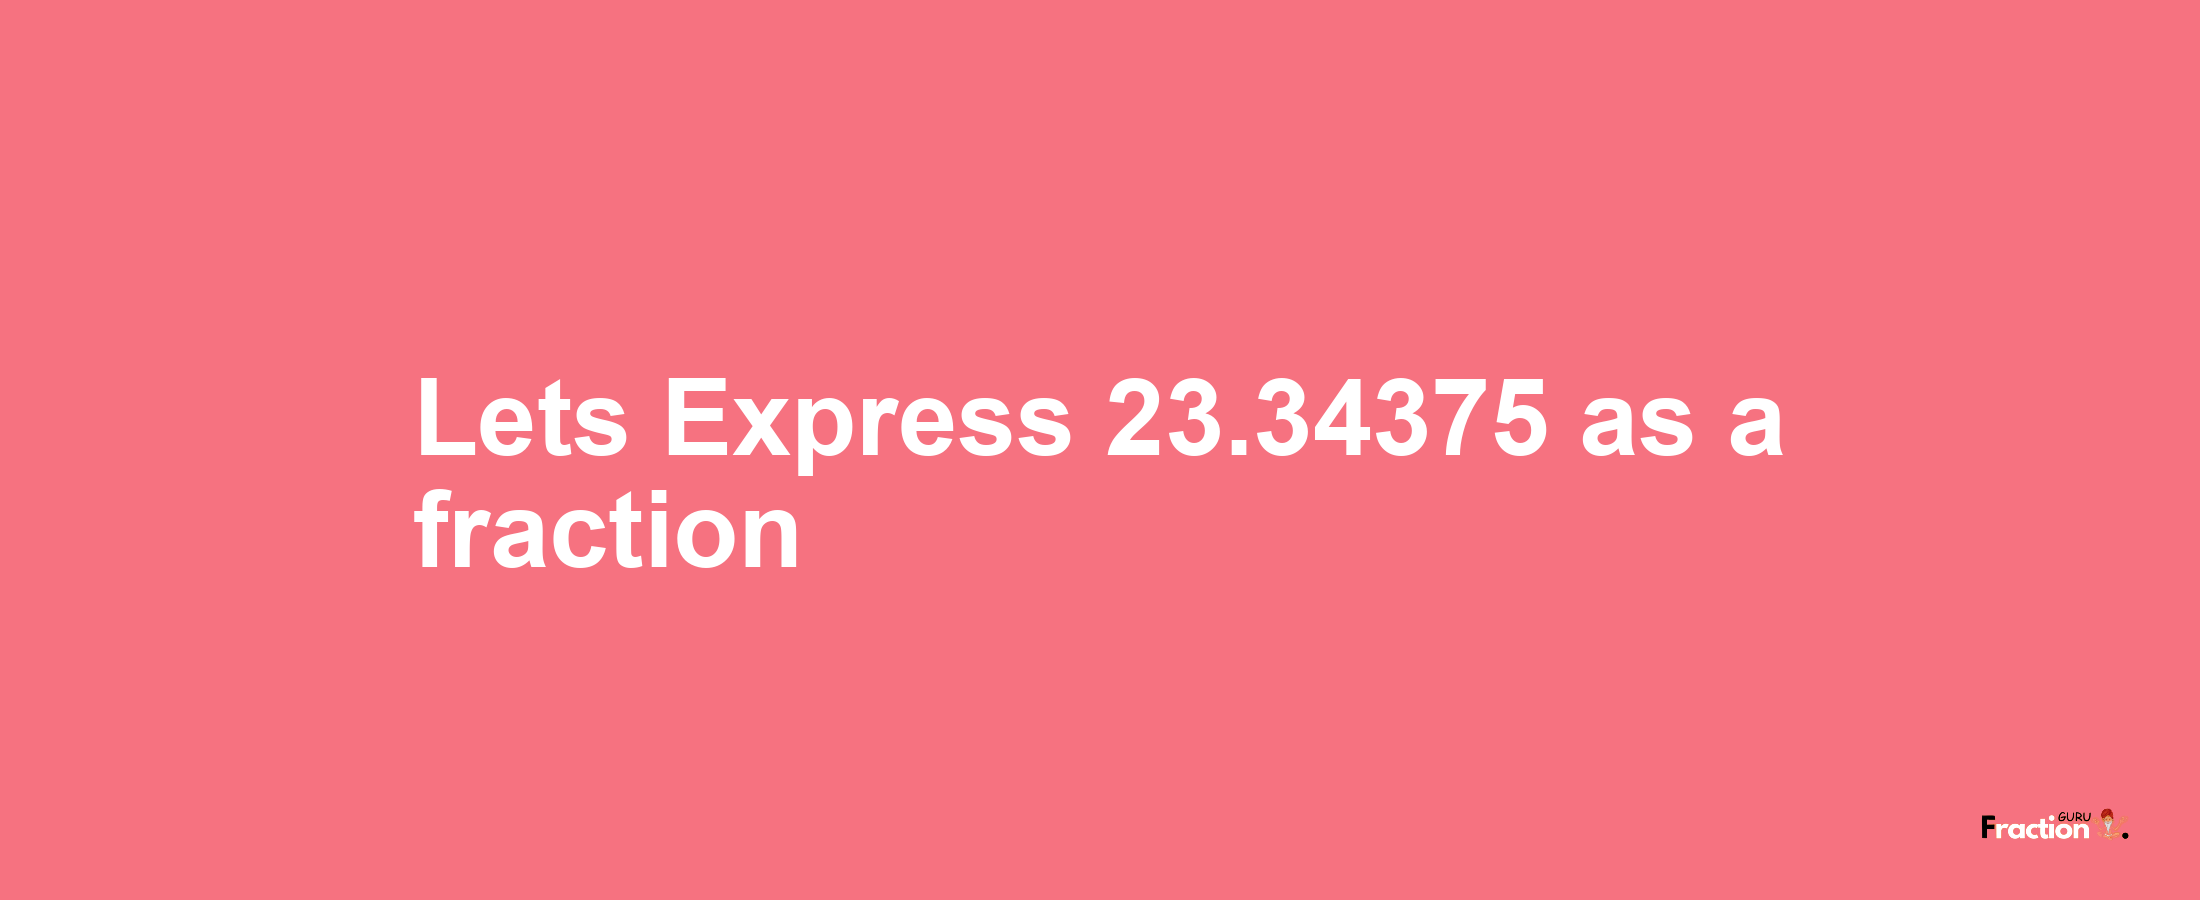 Lets Express 23.34375 as afraction